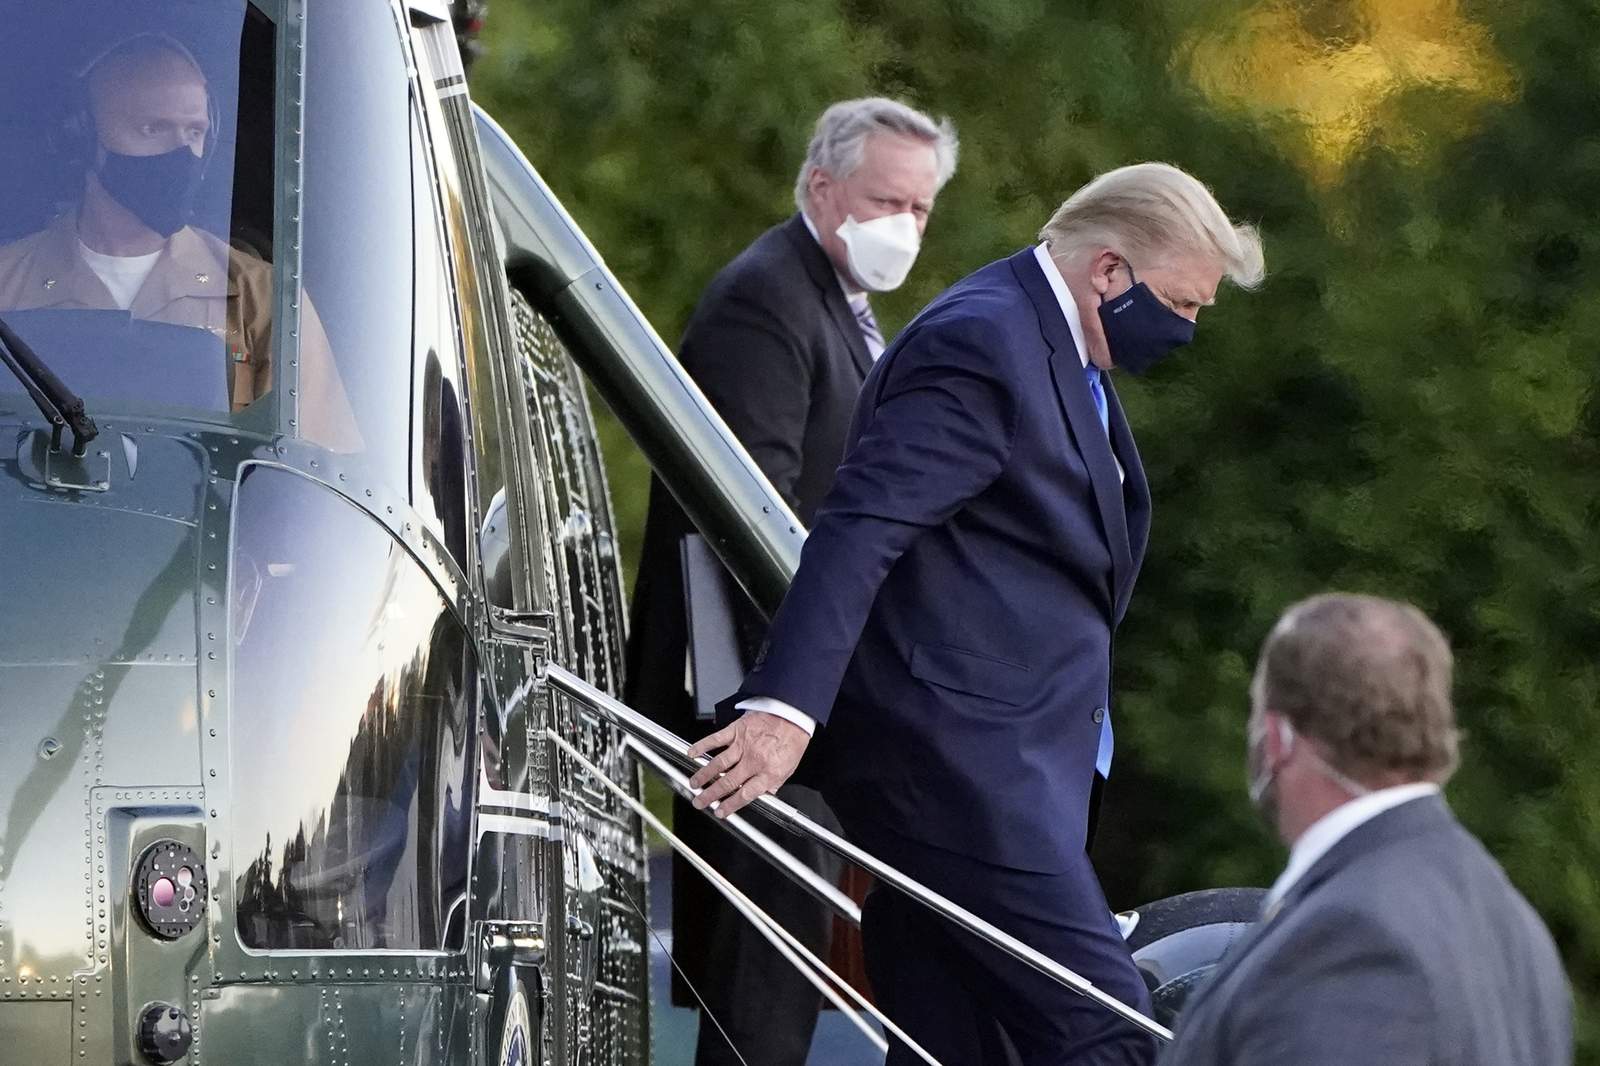 The Latest: Doctor says Trump 'not yet out of the woods'